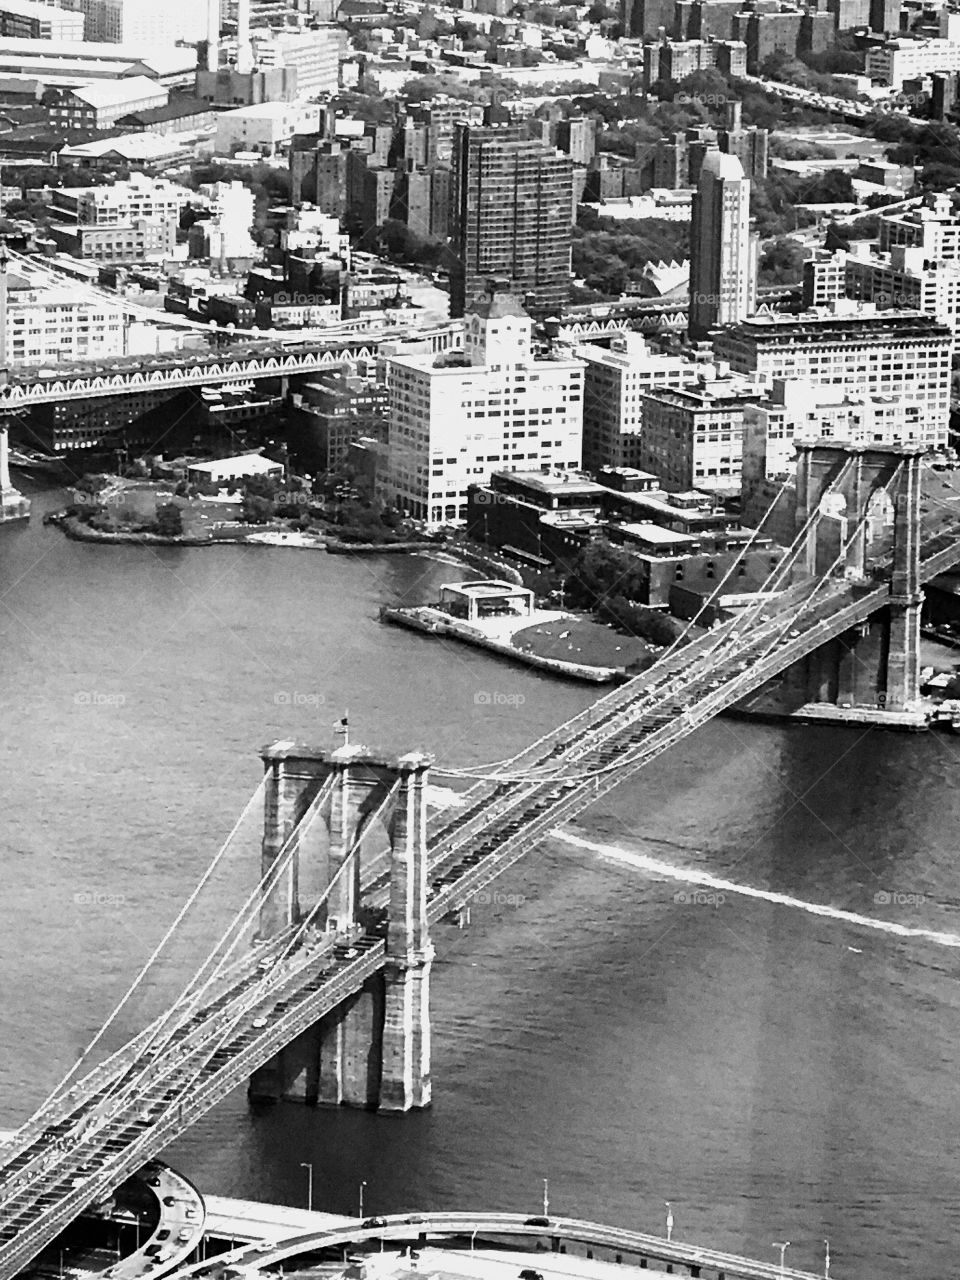 View of Brooklyn Bridge from One World Trade Center, New York City